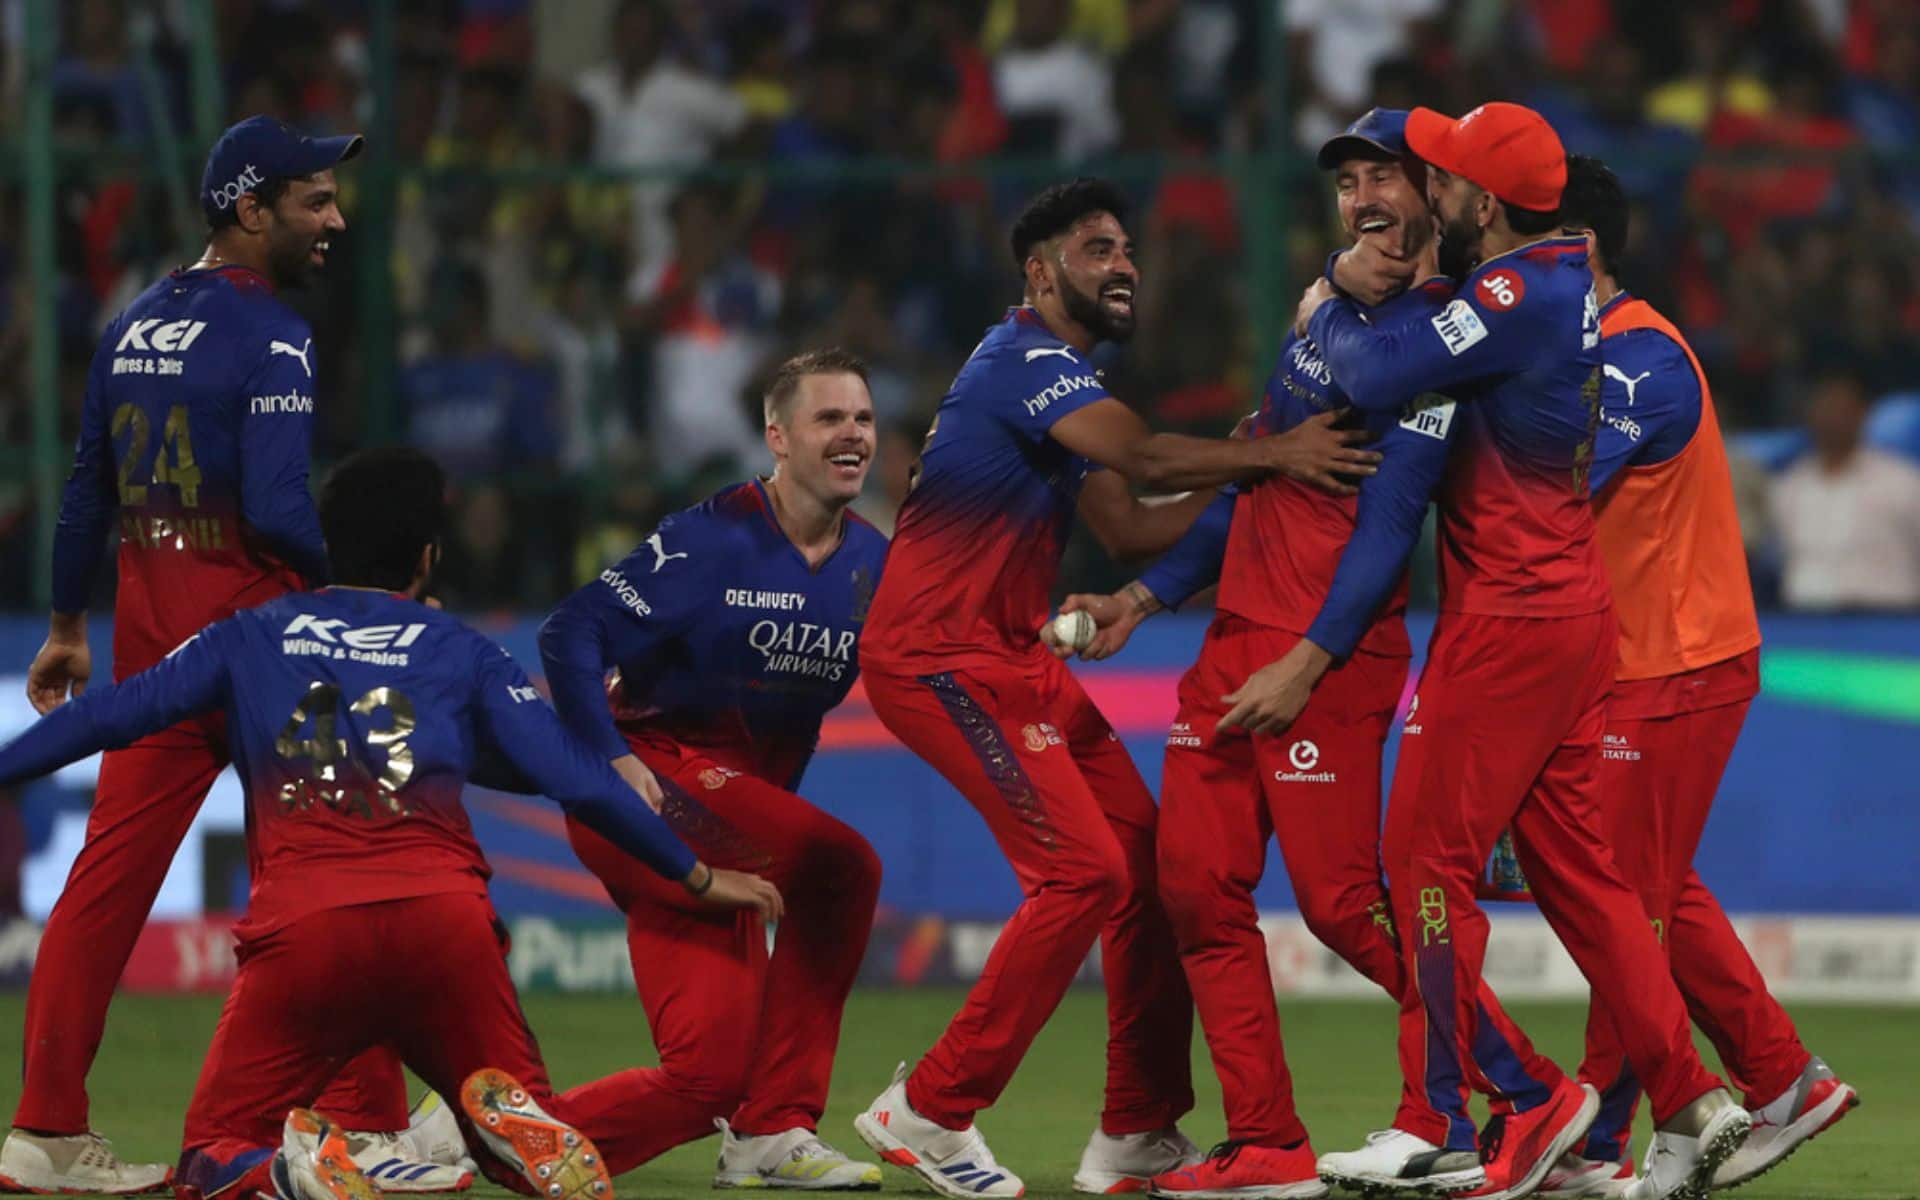 'KohliFies To Playoffs' Twitter Reacts To RCB's Remarkable Comeback